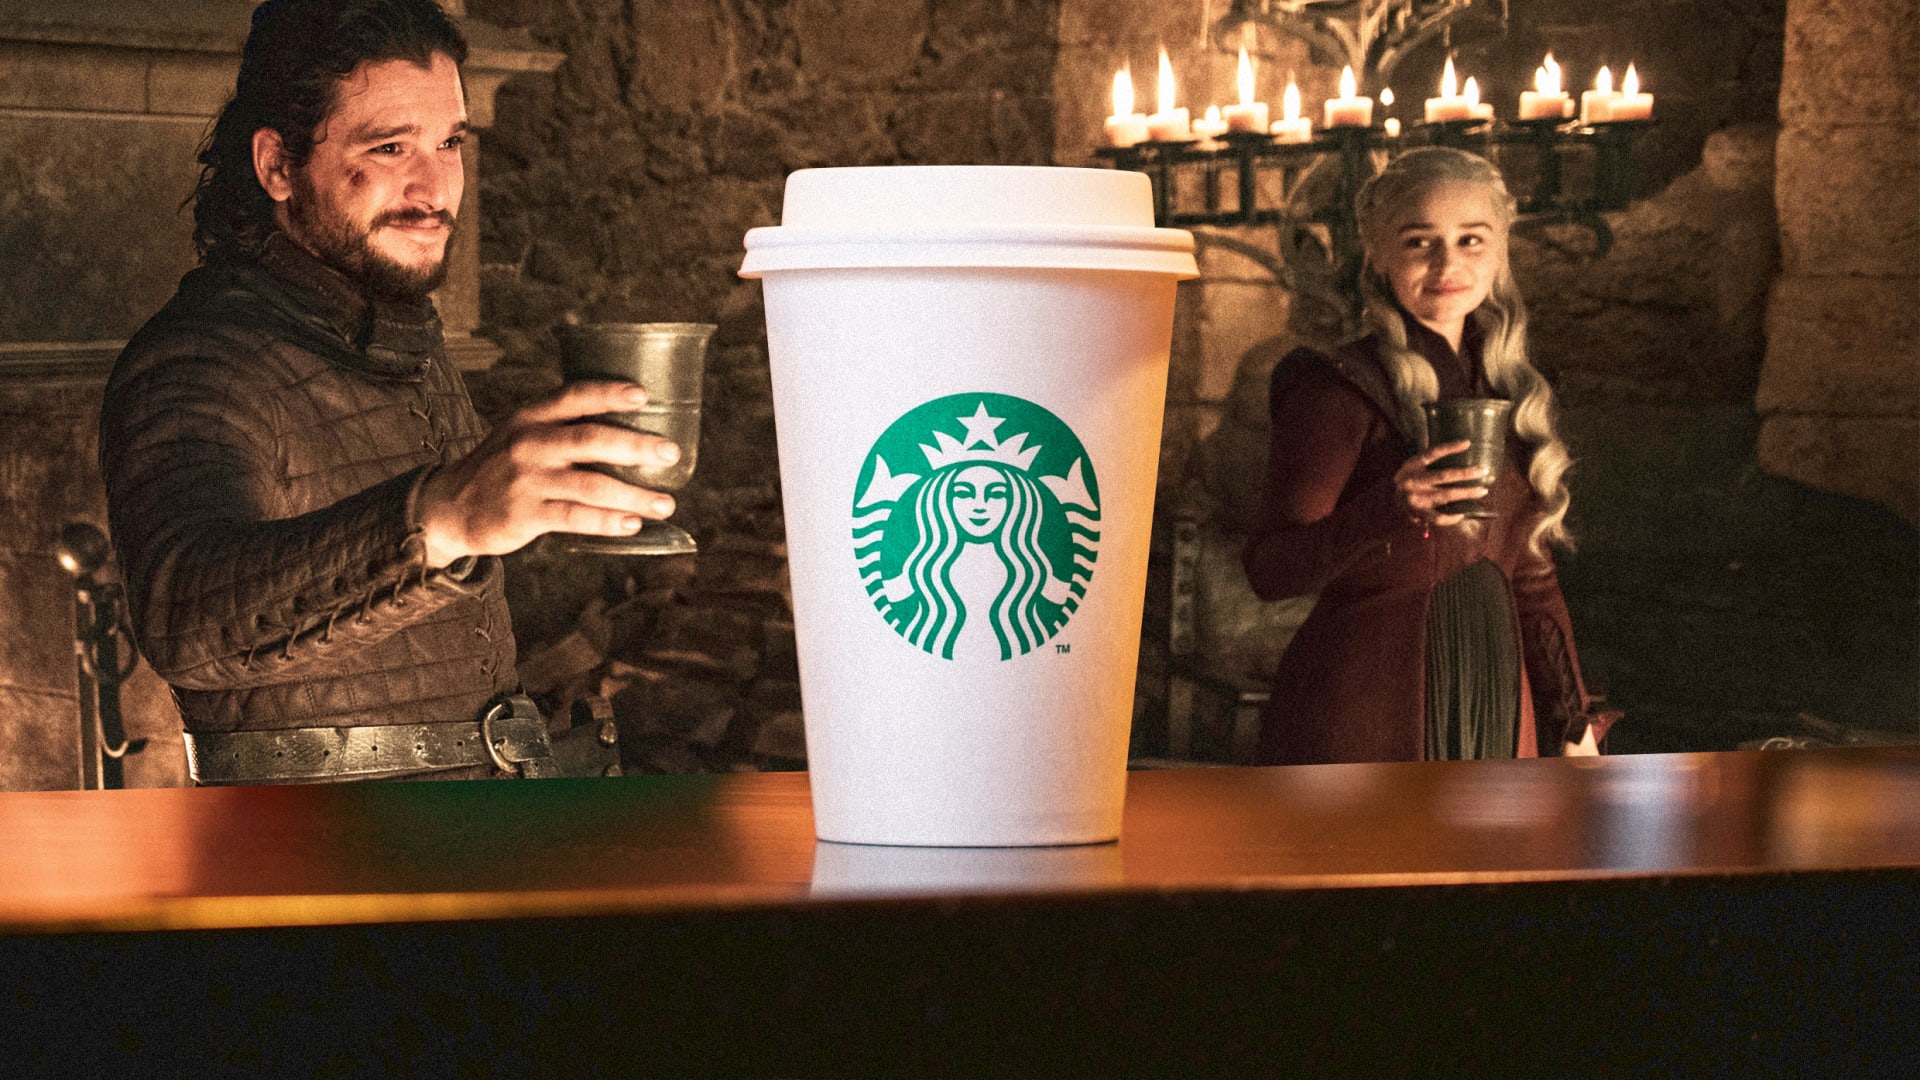 Hey HBO, Adobe fixed the Starbucks cup in Game of Thrones for you